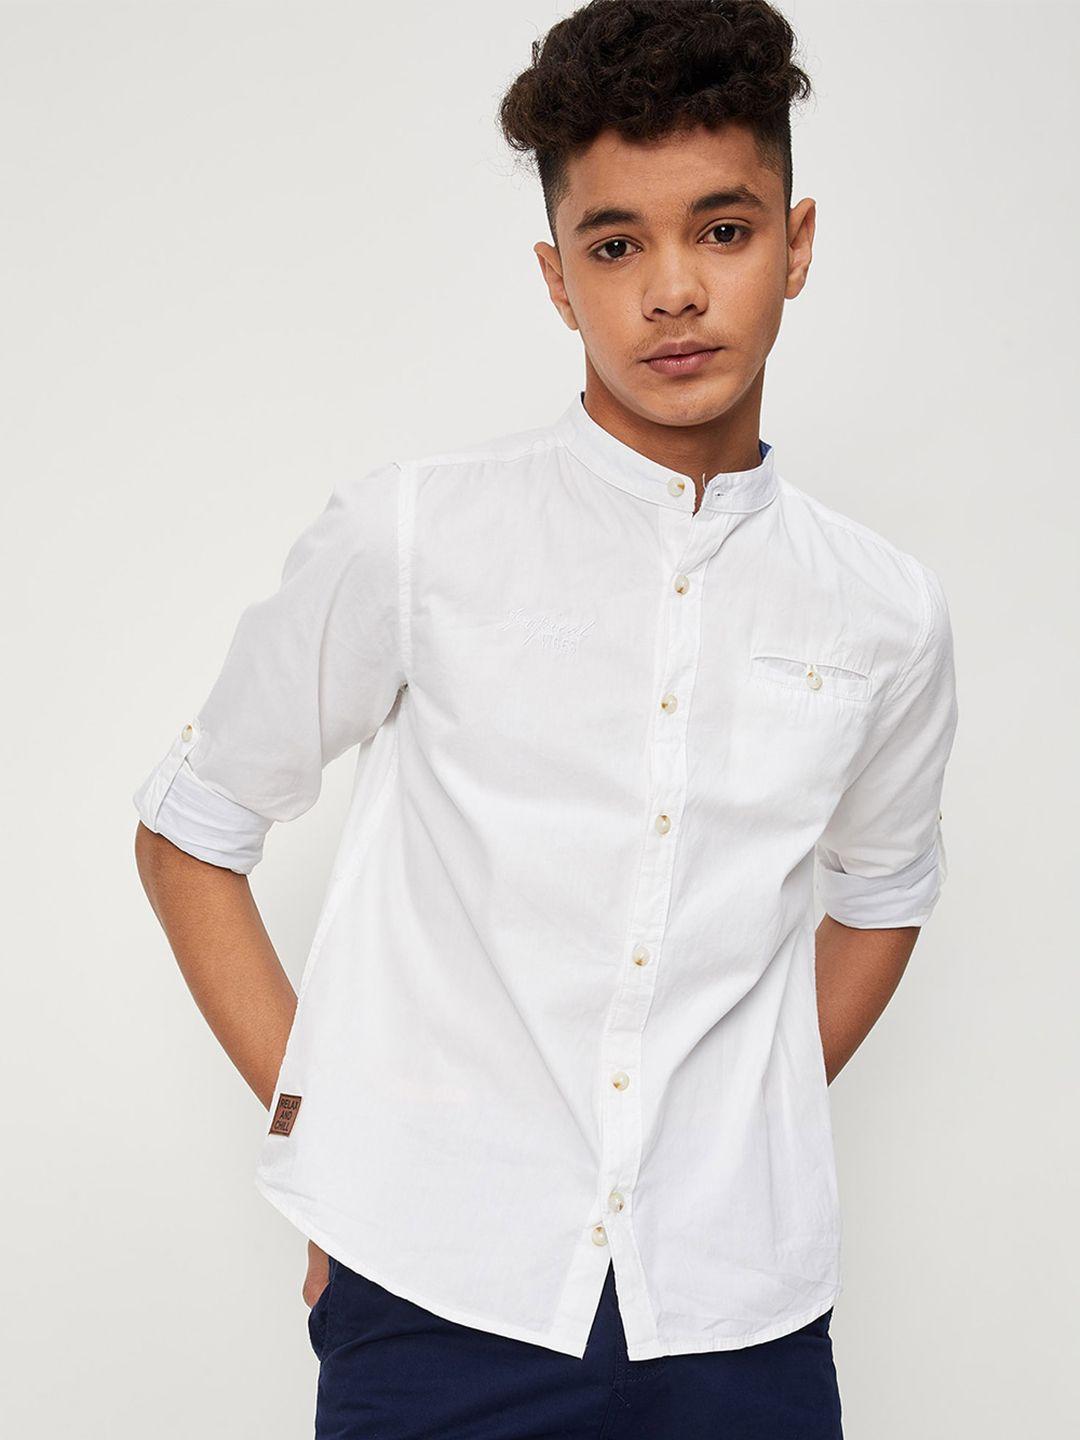 max-boys-pure-cotton-regular-fit-casual-shirt